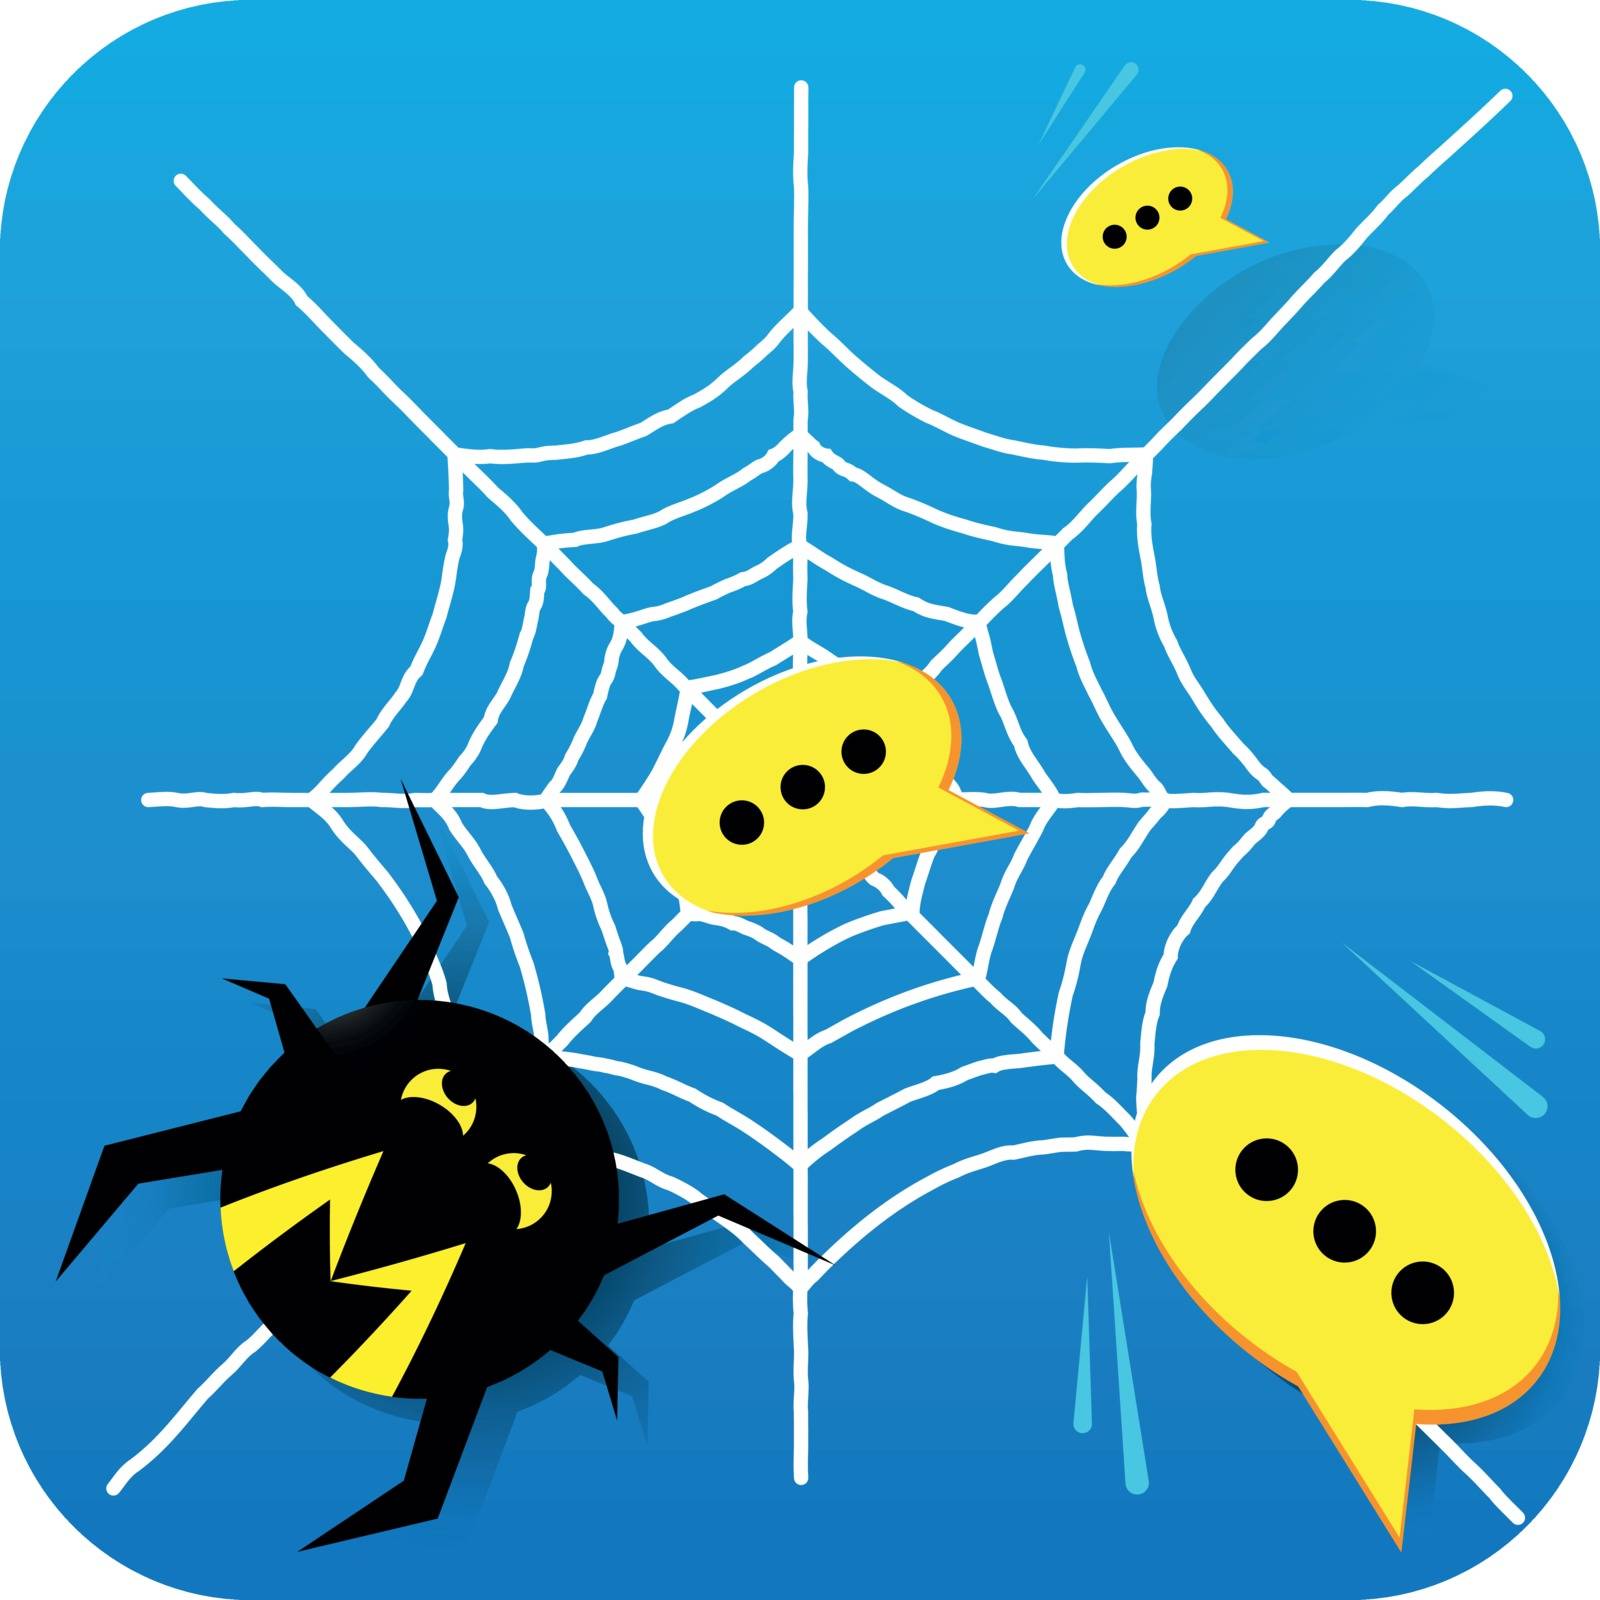 Mobile Application Icon with Cartoon Spider Catching Spam Messages into his Web